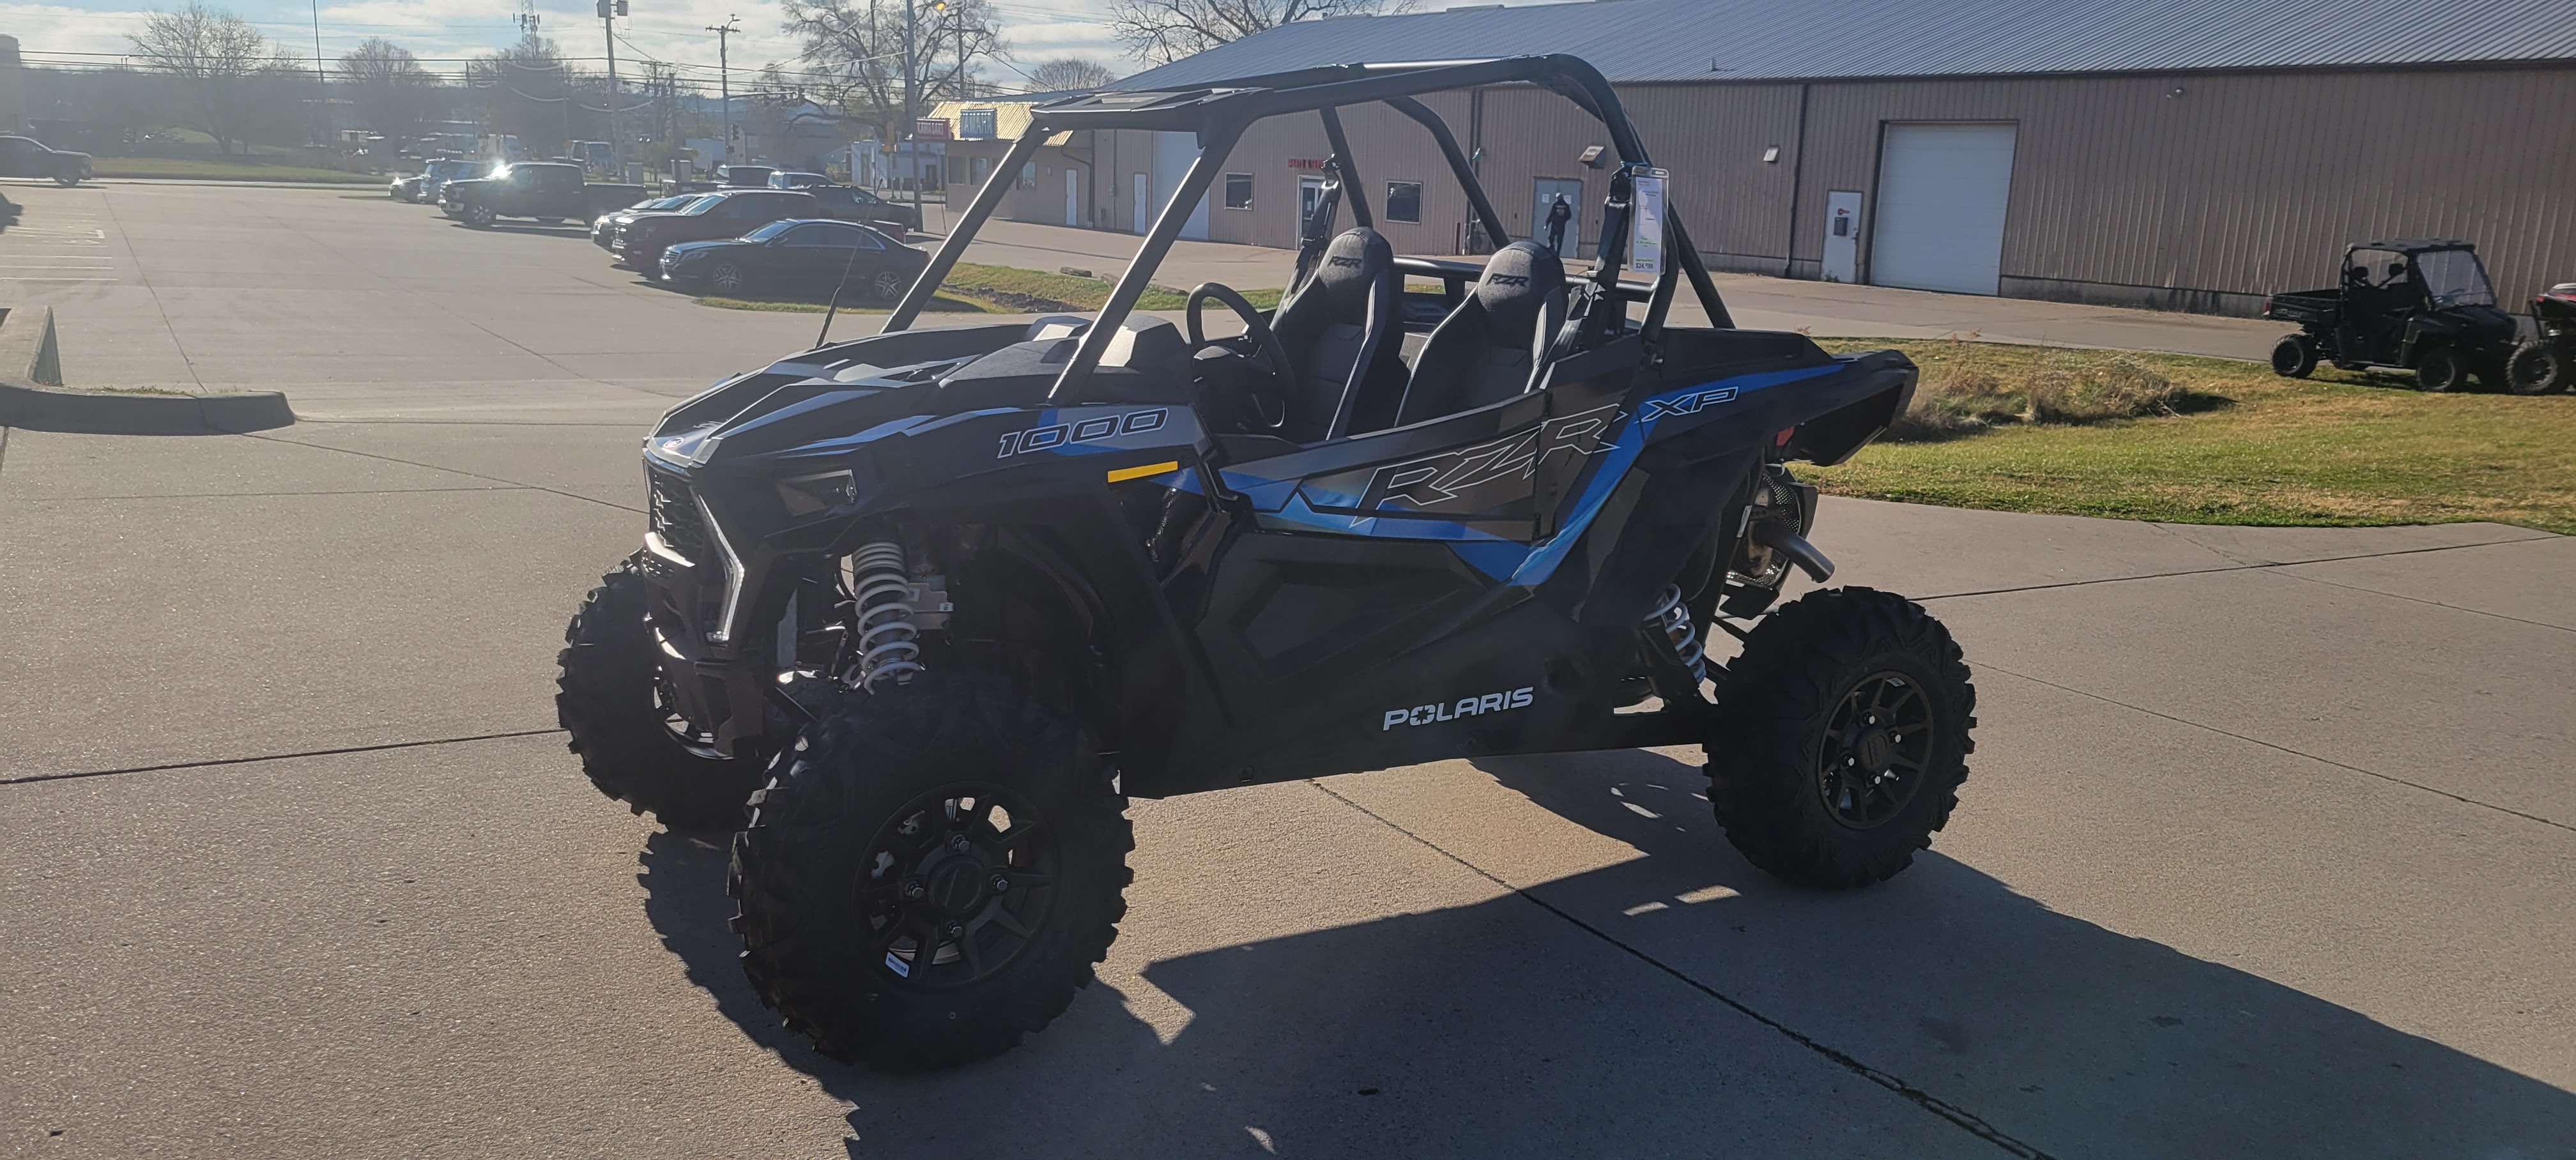 2023 Polaris RZR XP 1000 Ultimate at Brenny's Motorcycle Clinic, Bettendorf, IA 52722